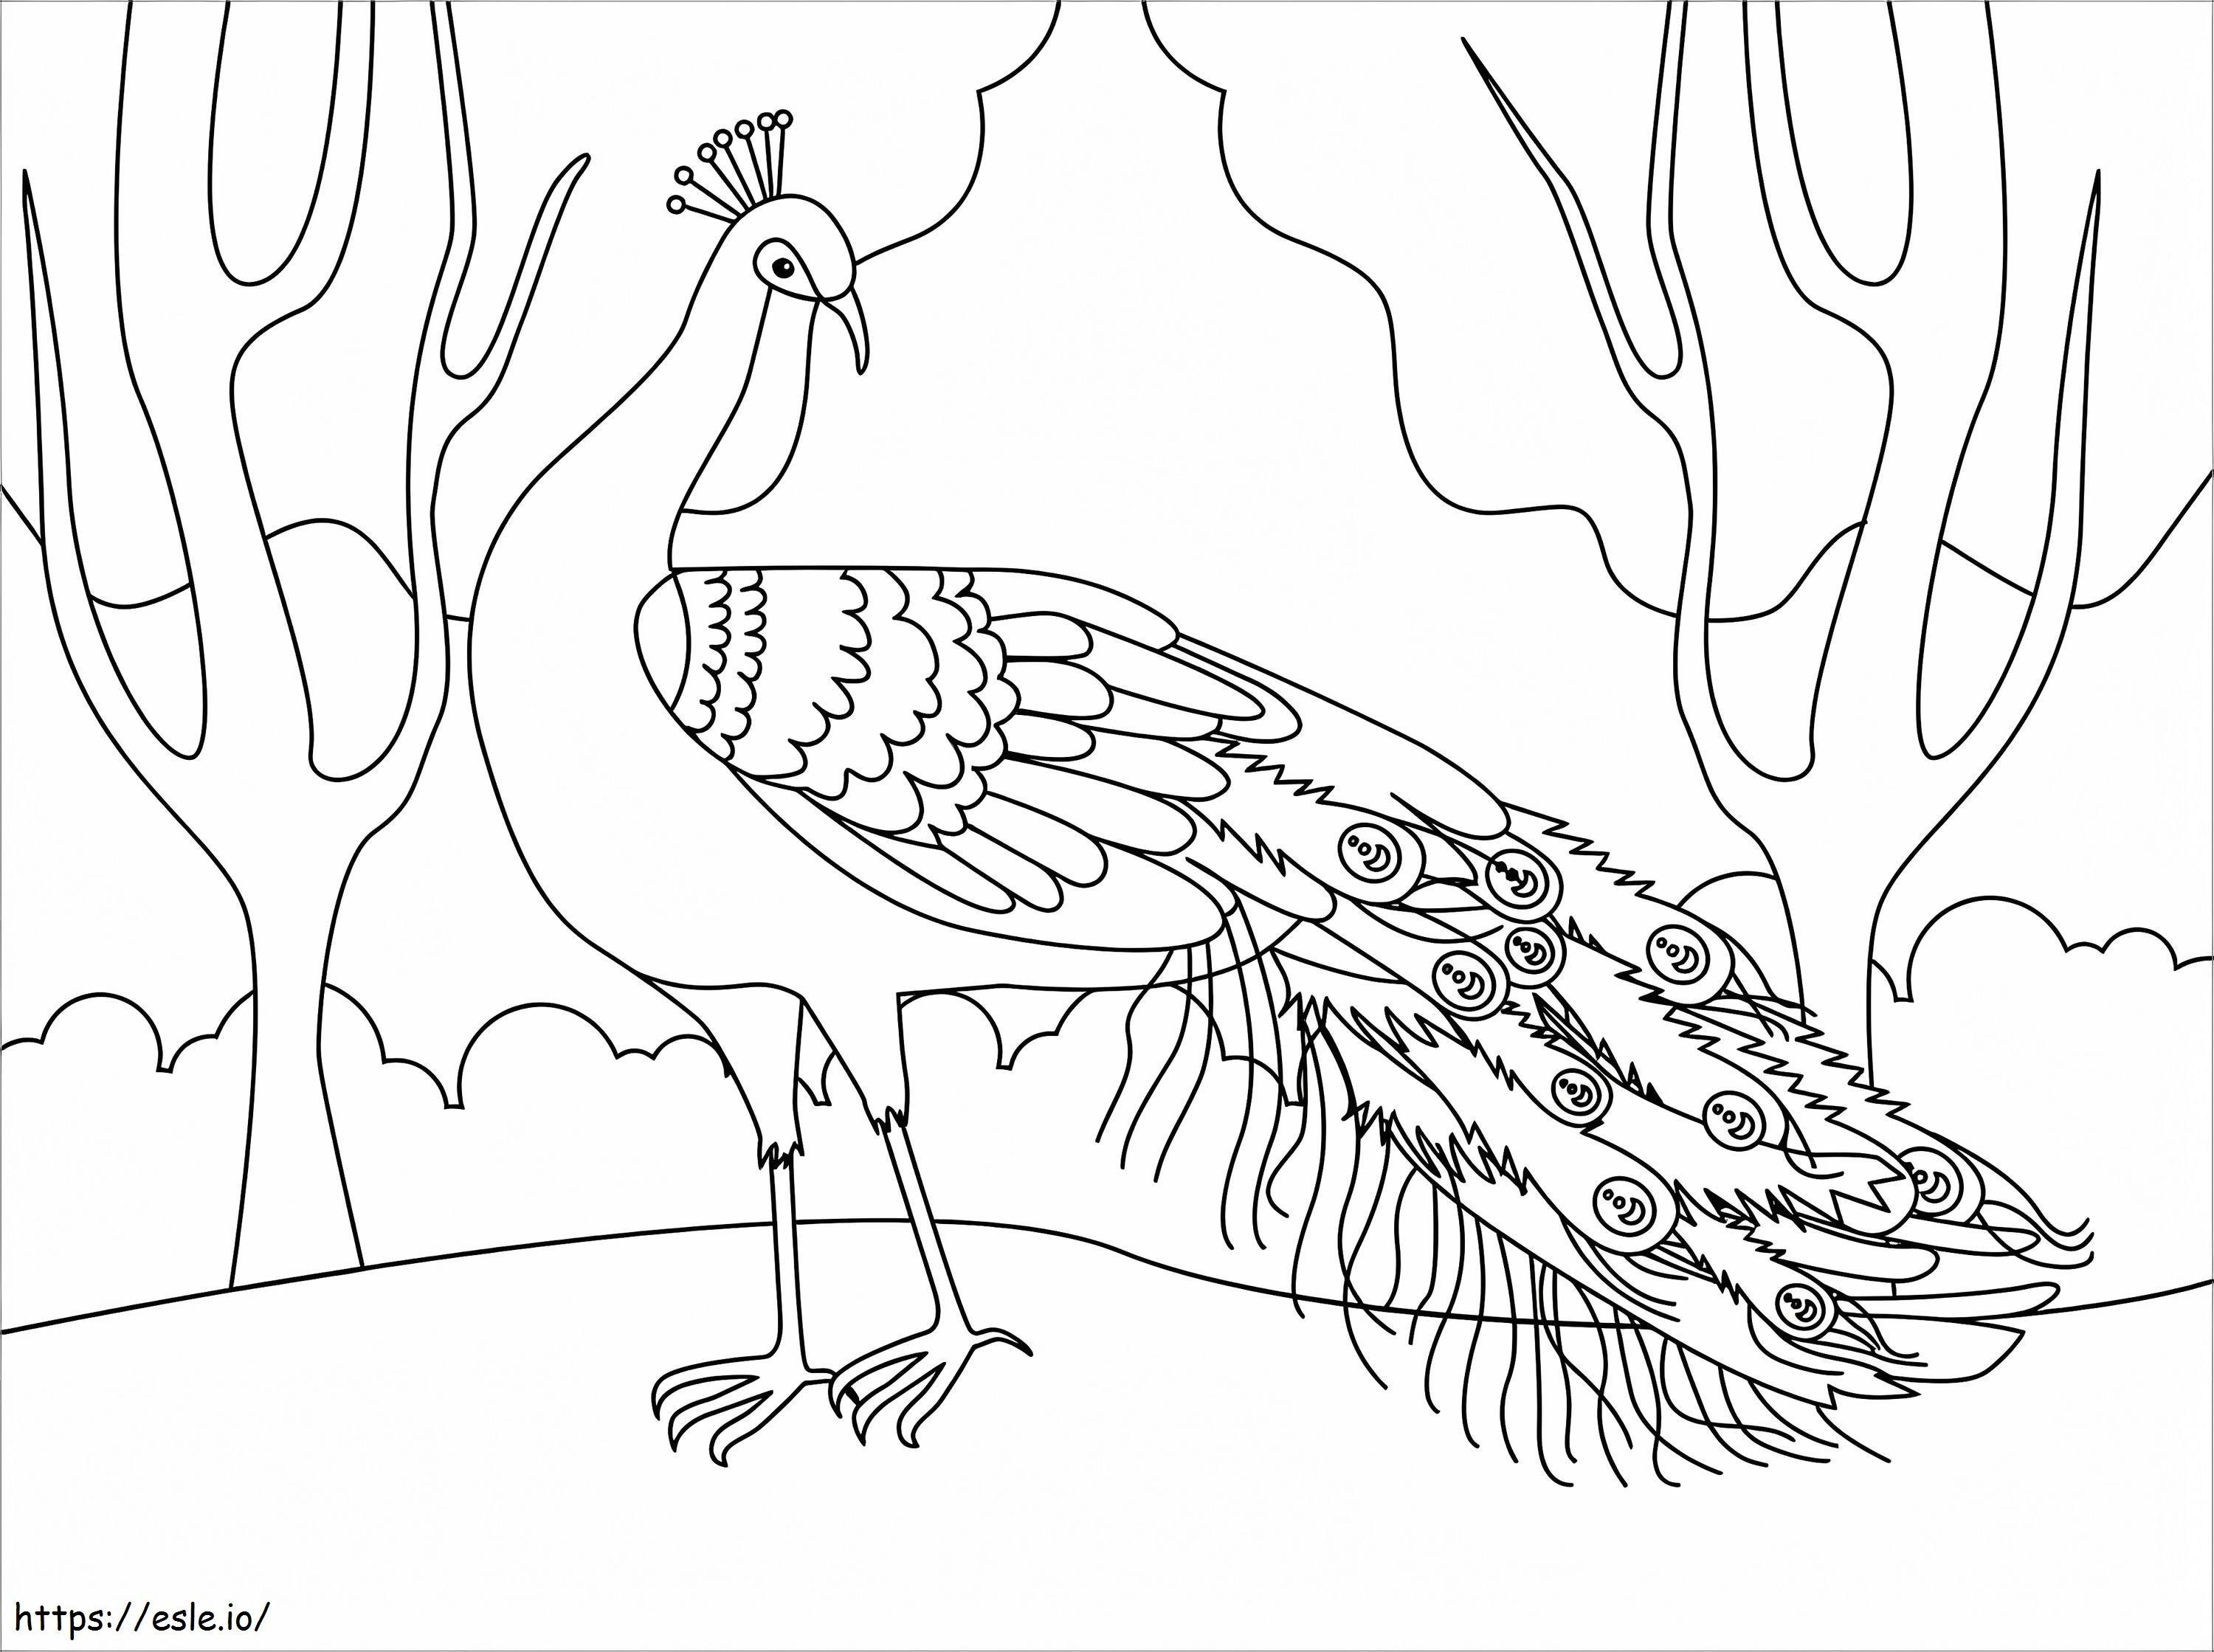 Normal Peacock coloring page